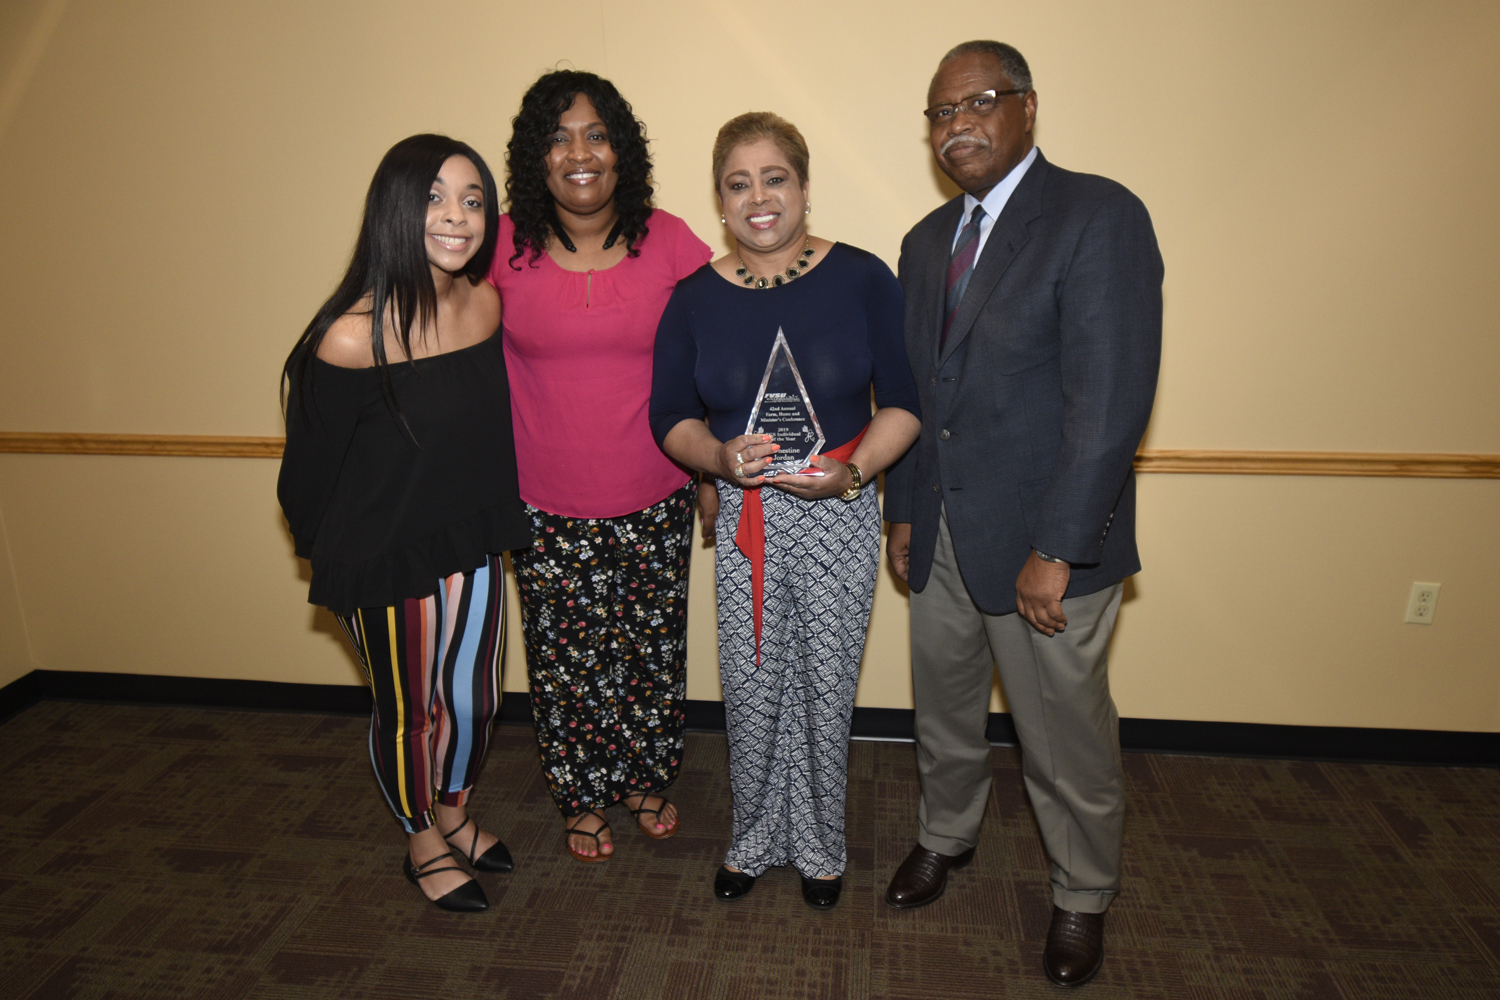 Millicent Price (second from left), FVSU Extension agent for Crawford County and Dr. Mark Latimore Jr. (far right) present Earnestine Jordan (holding trophy) with the 2019 FACS Individual of the Year Award.